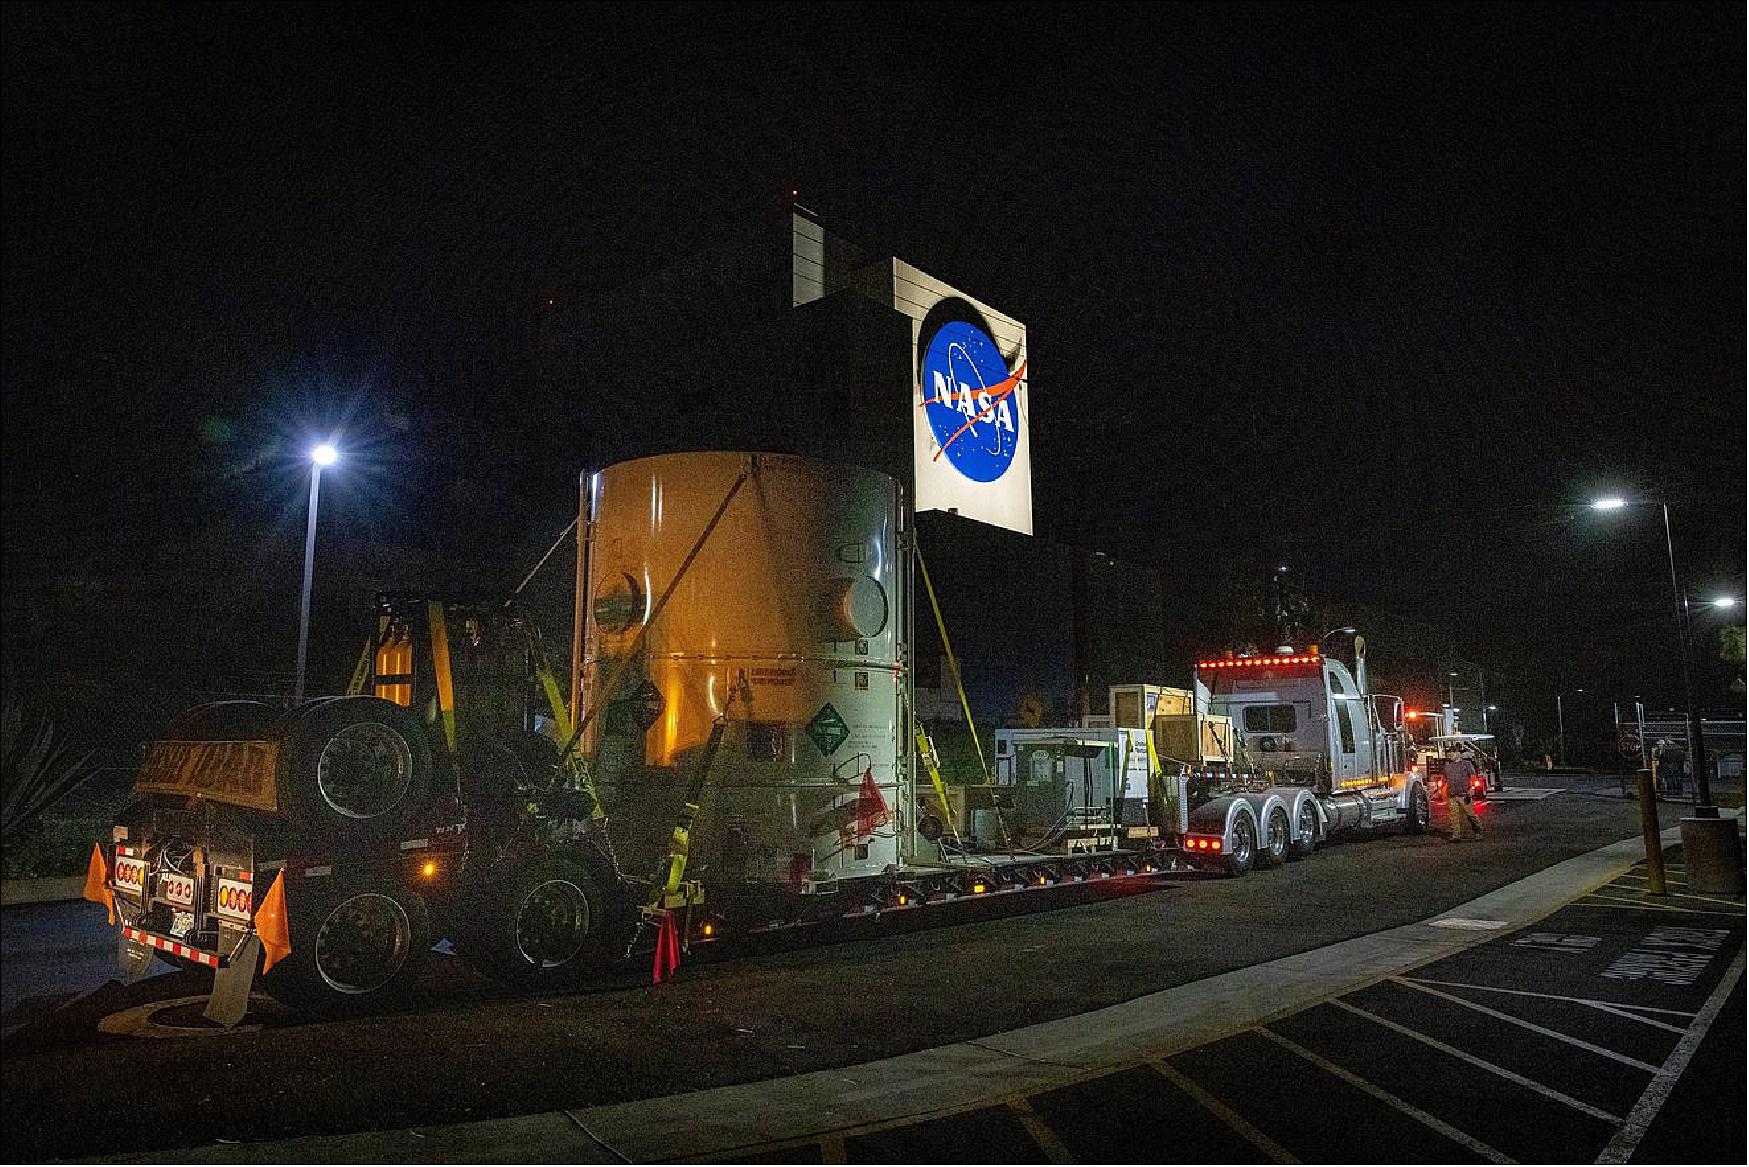 Figure 8: The main body of NASA's Europa Clipper spacecraft is seen in its shipping container as it rolls into the agency's Jet Propulsion Laboratory in Southern California (image credit: NASA/JPL-Caltech/Johns Hopkins APL/Ed Whitman)